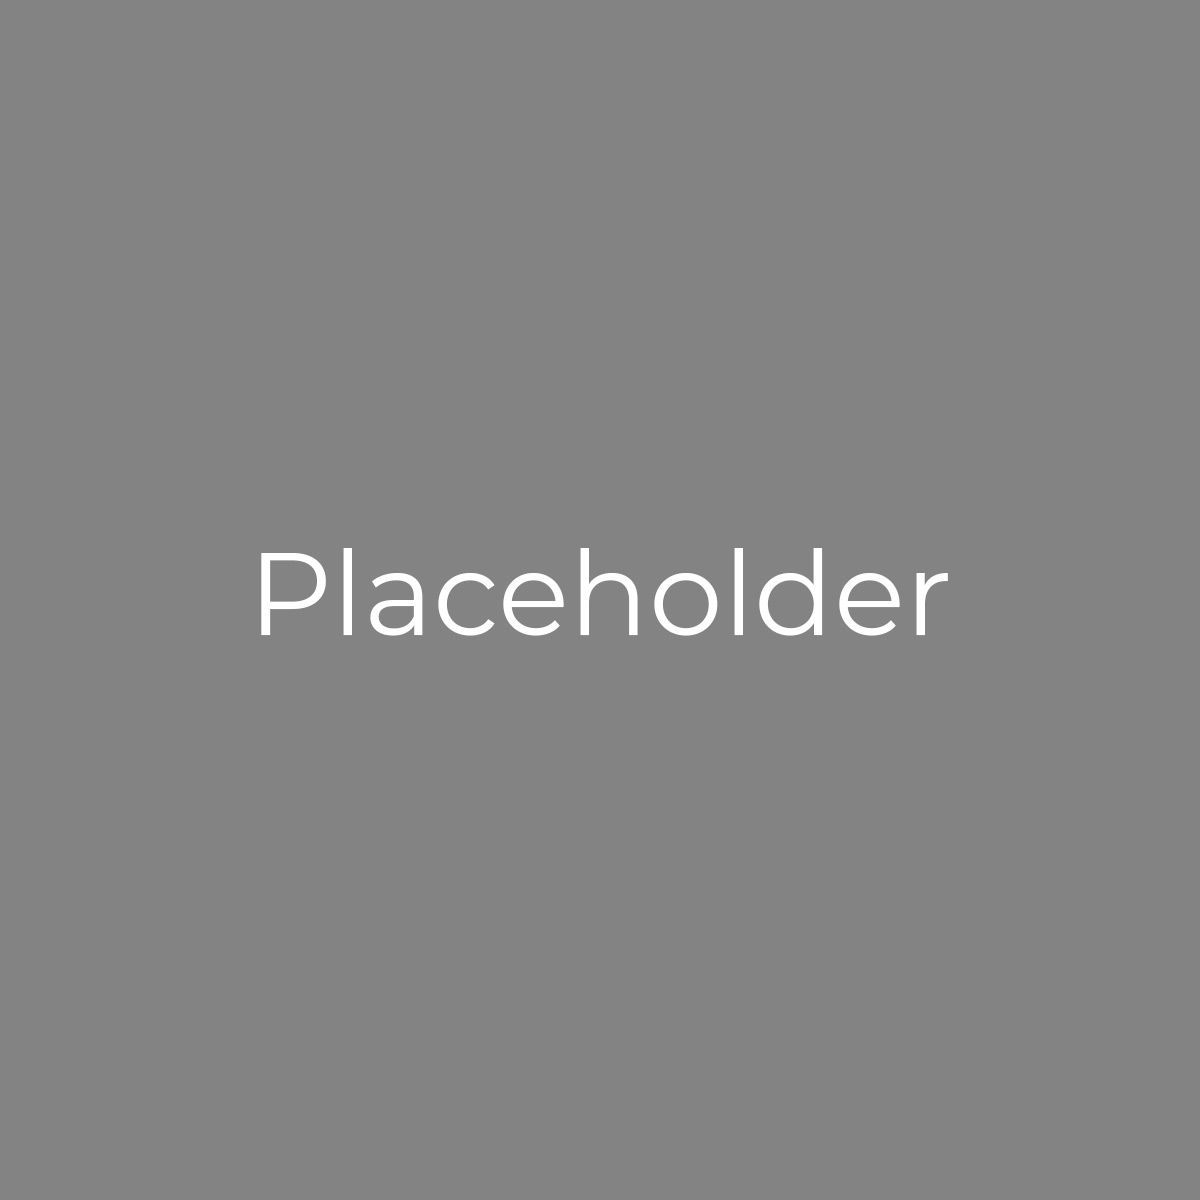 The word placeholder is on a gray background.